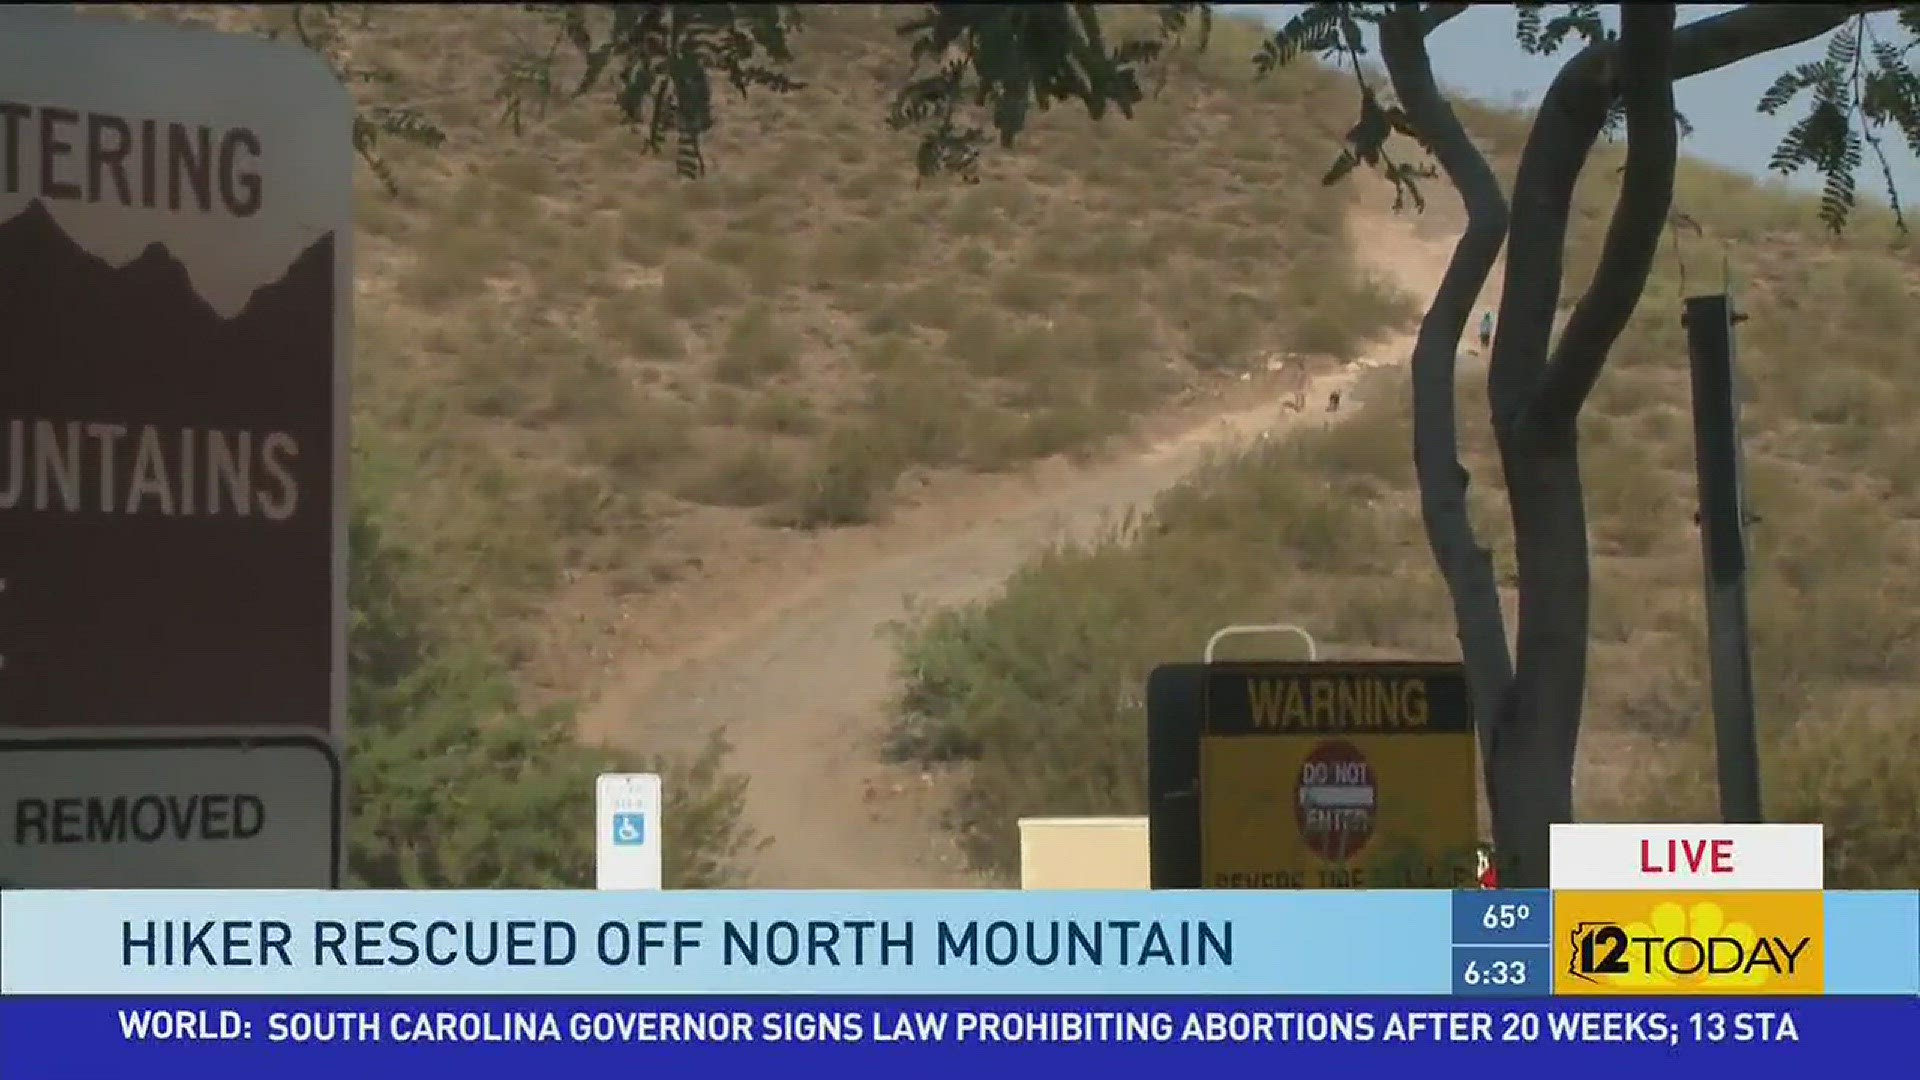 A middle-aged man took a bus to North Mountain to go snake hunting. He brought no water, only beer.